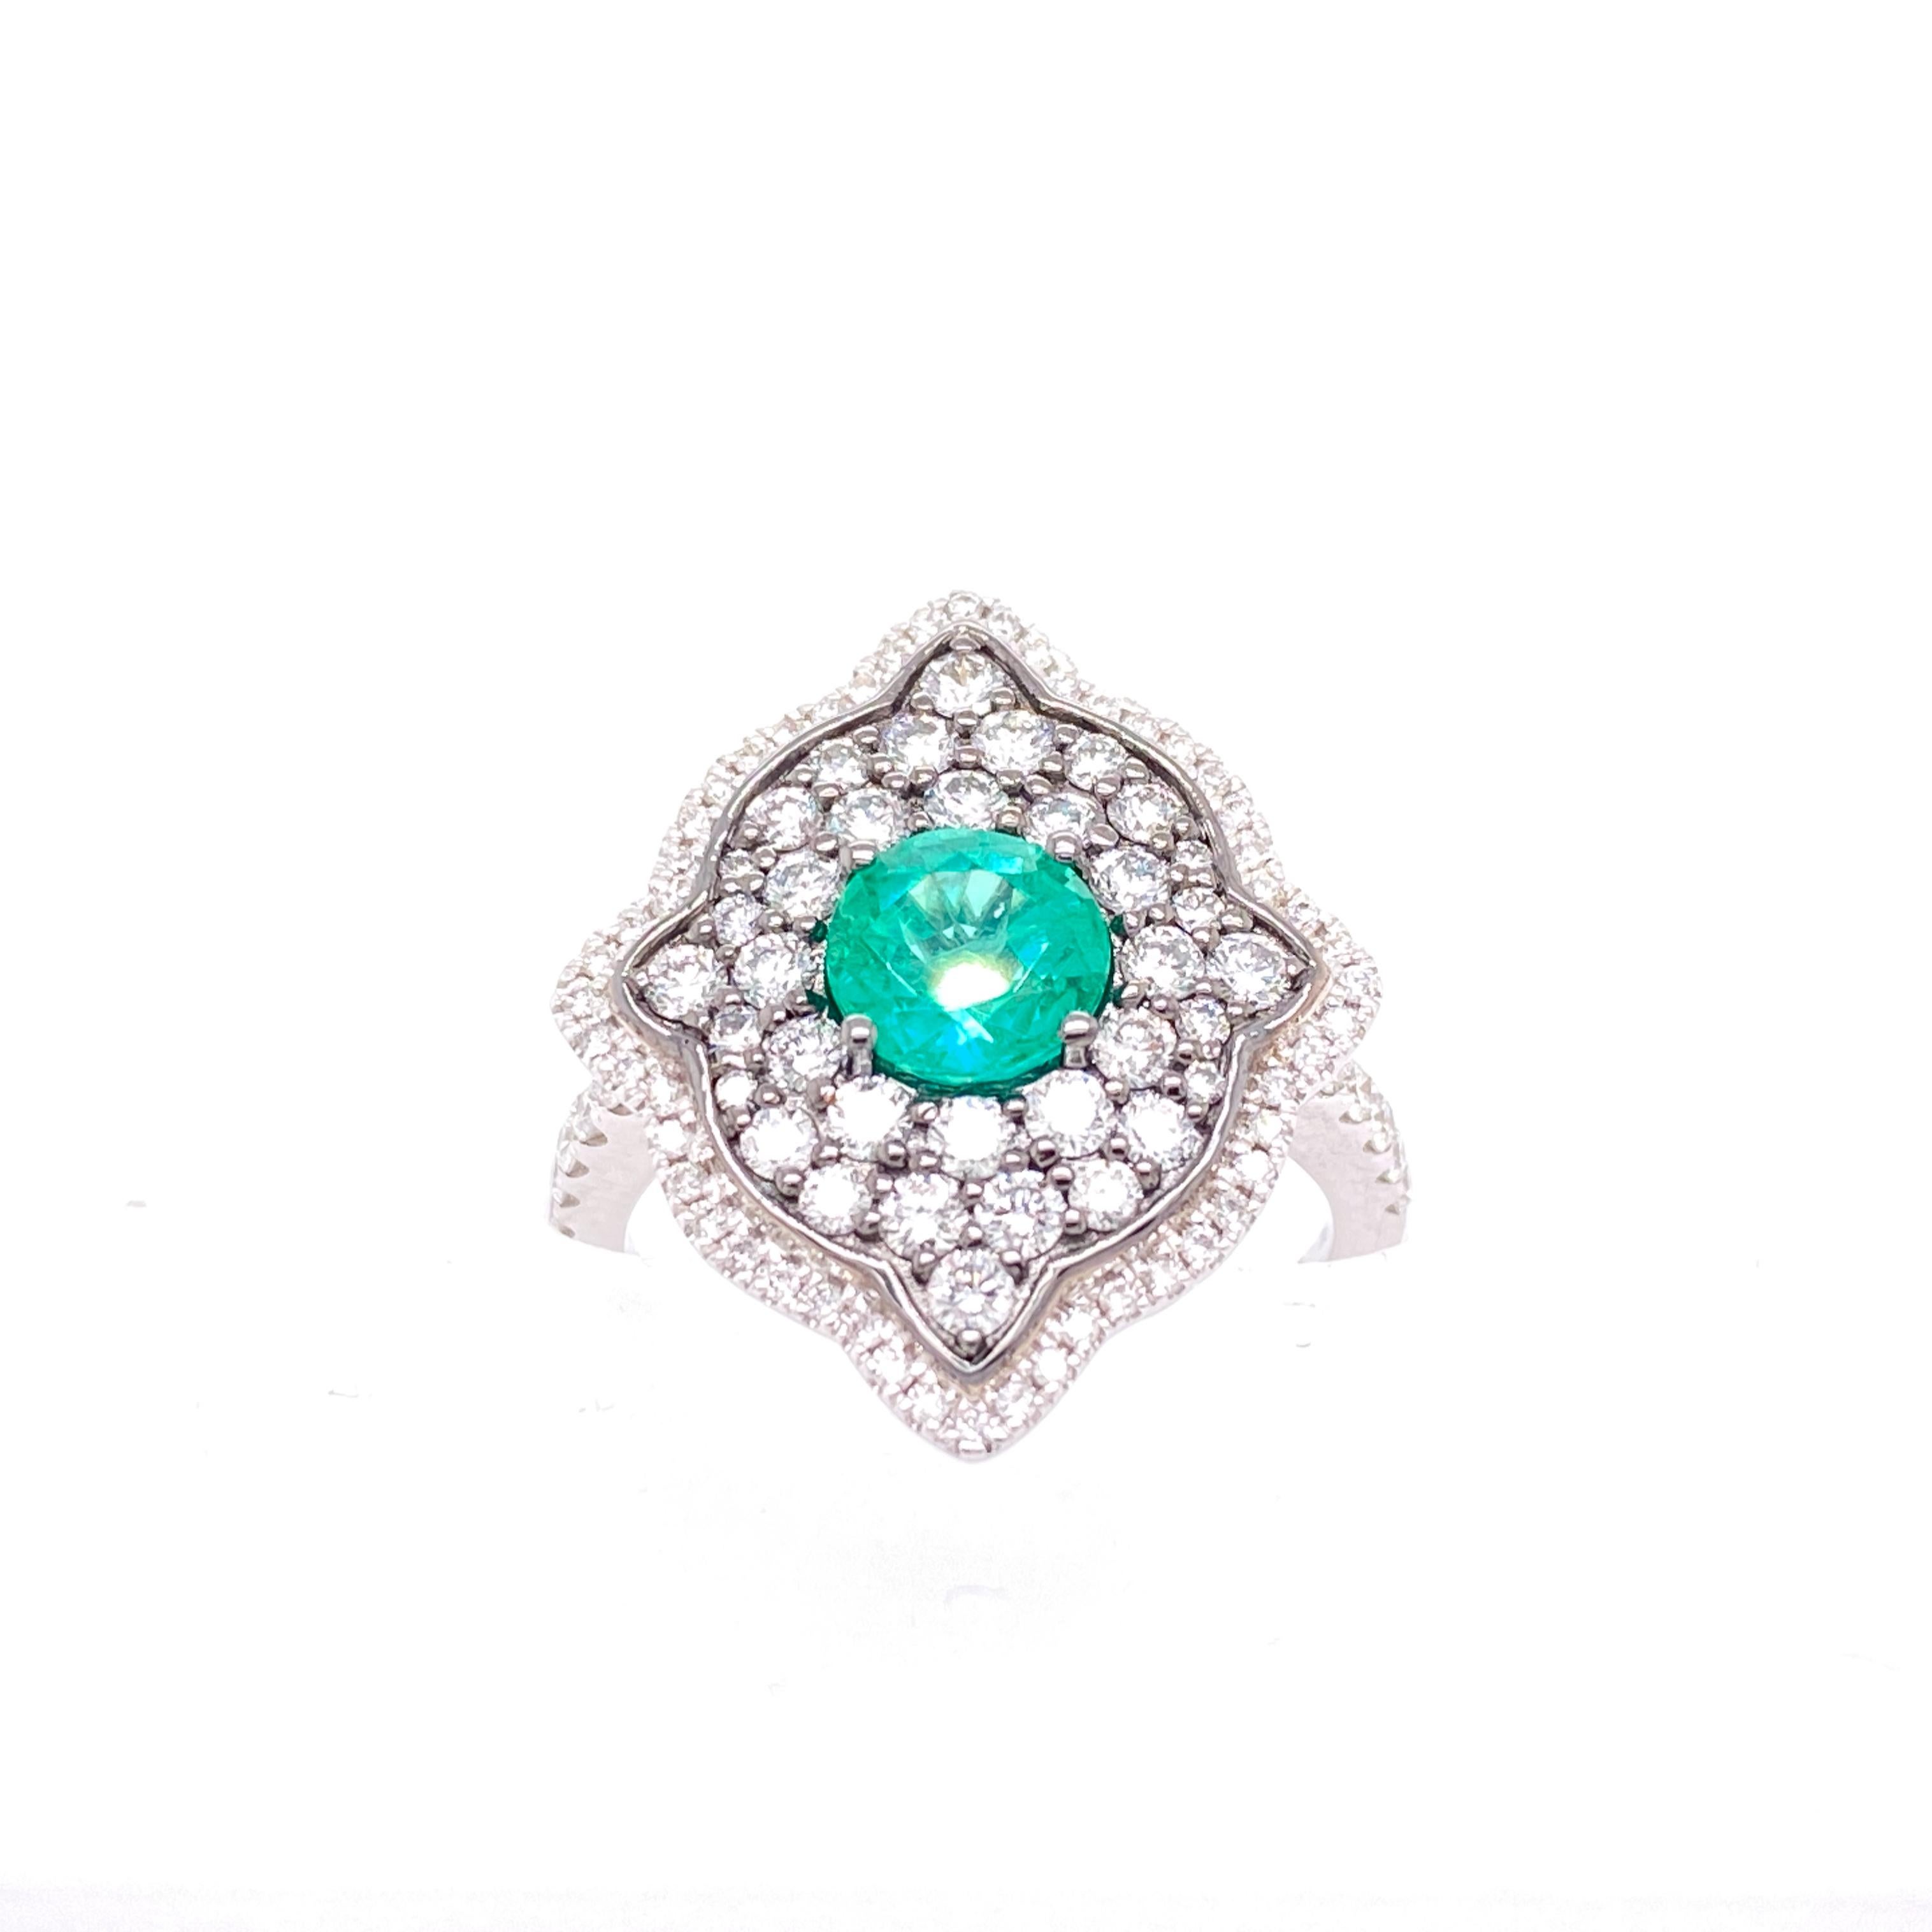 This stunning Cocktail Ring features a beautiful 0.91 Carat Round Emerald surrounded by Radiant Round White Diamonds, that sits on a Diamond Shank. This Ring is set in 18K White Gold. Total Diamond Weight = 0.99 carats. Ring Size is 6 1/2.